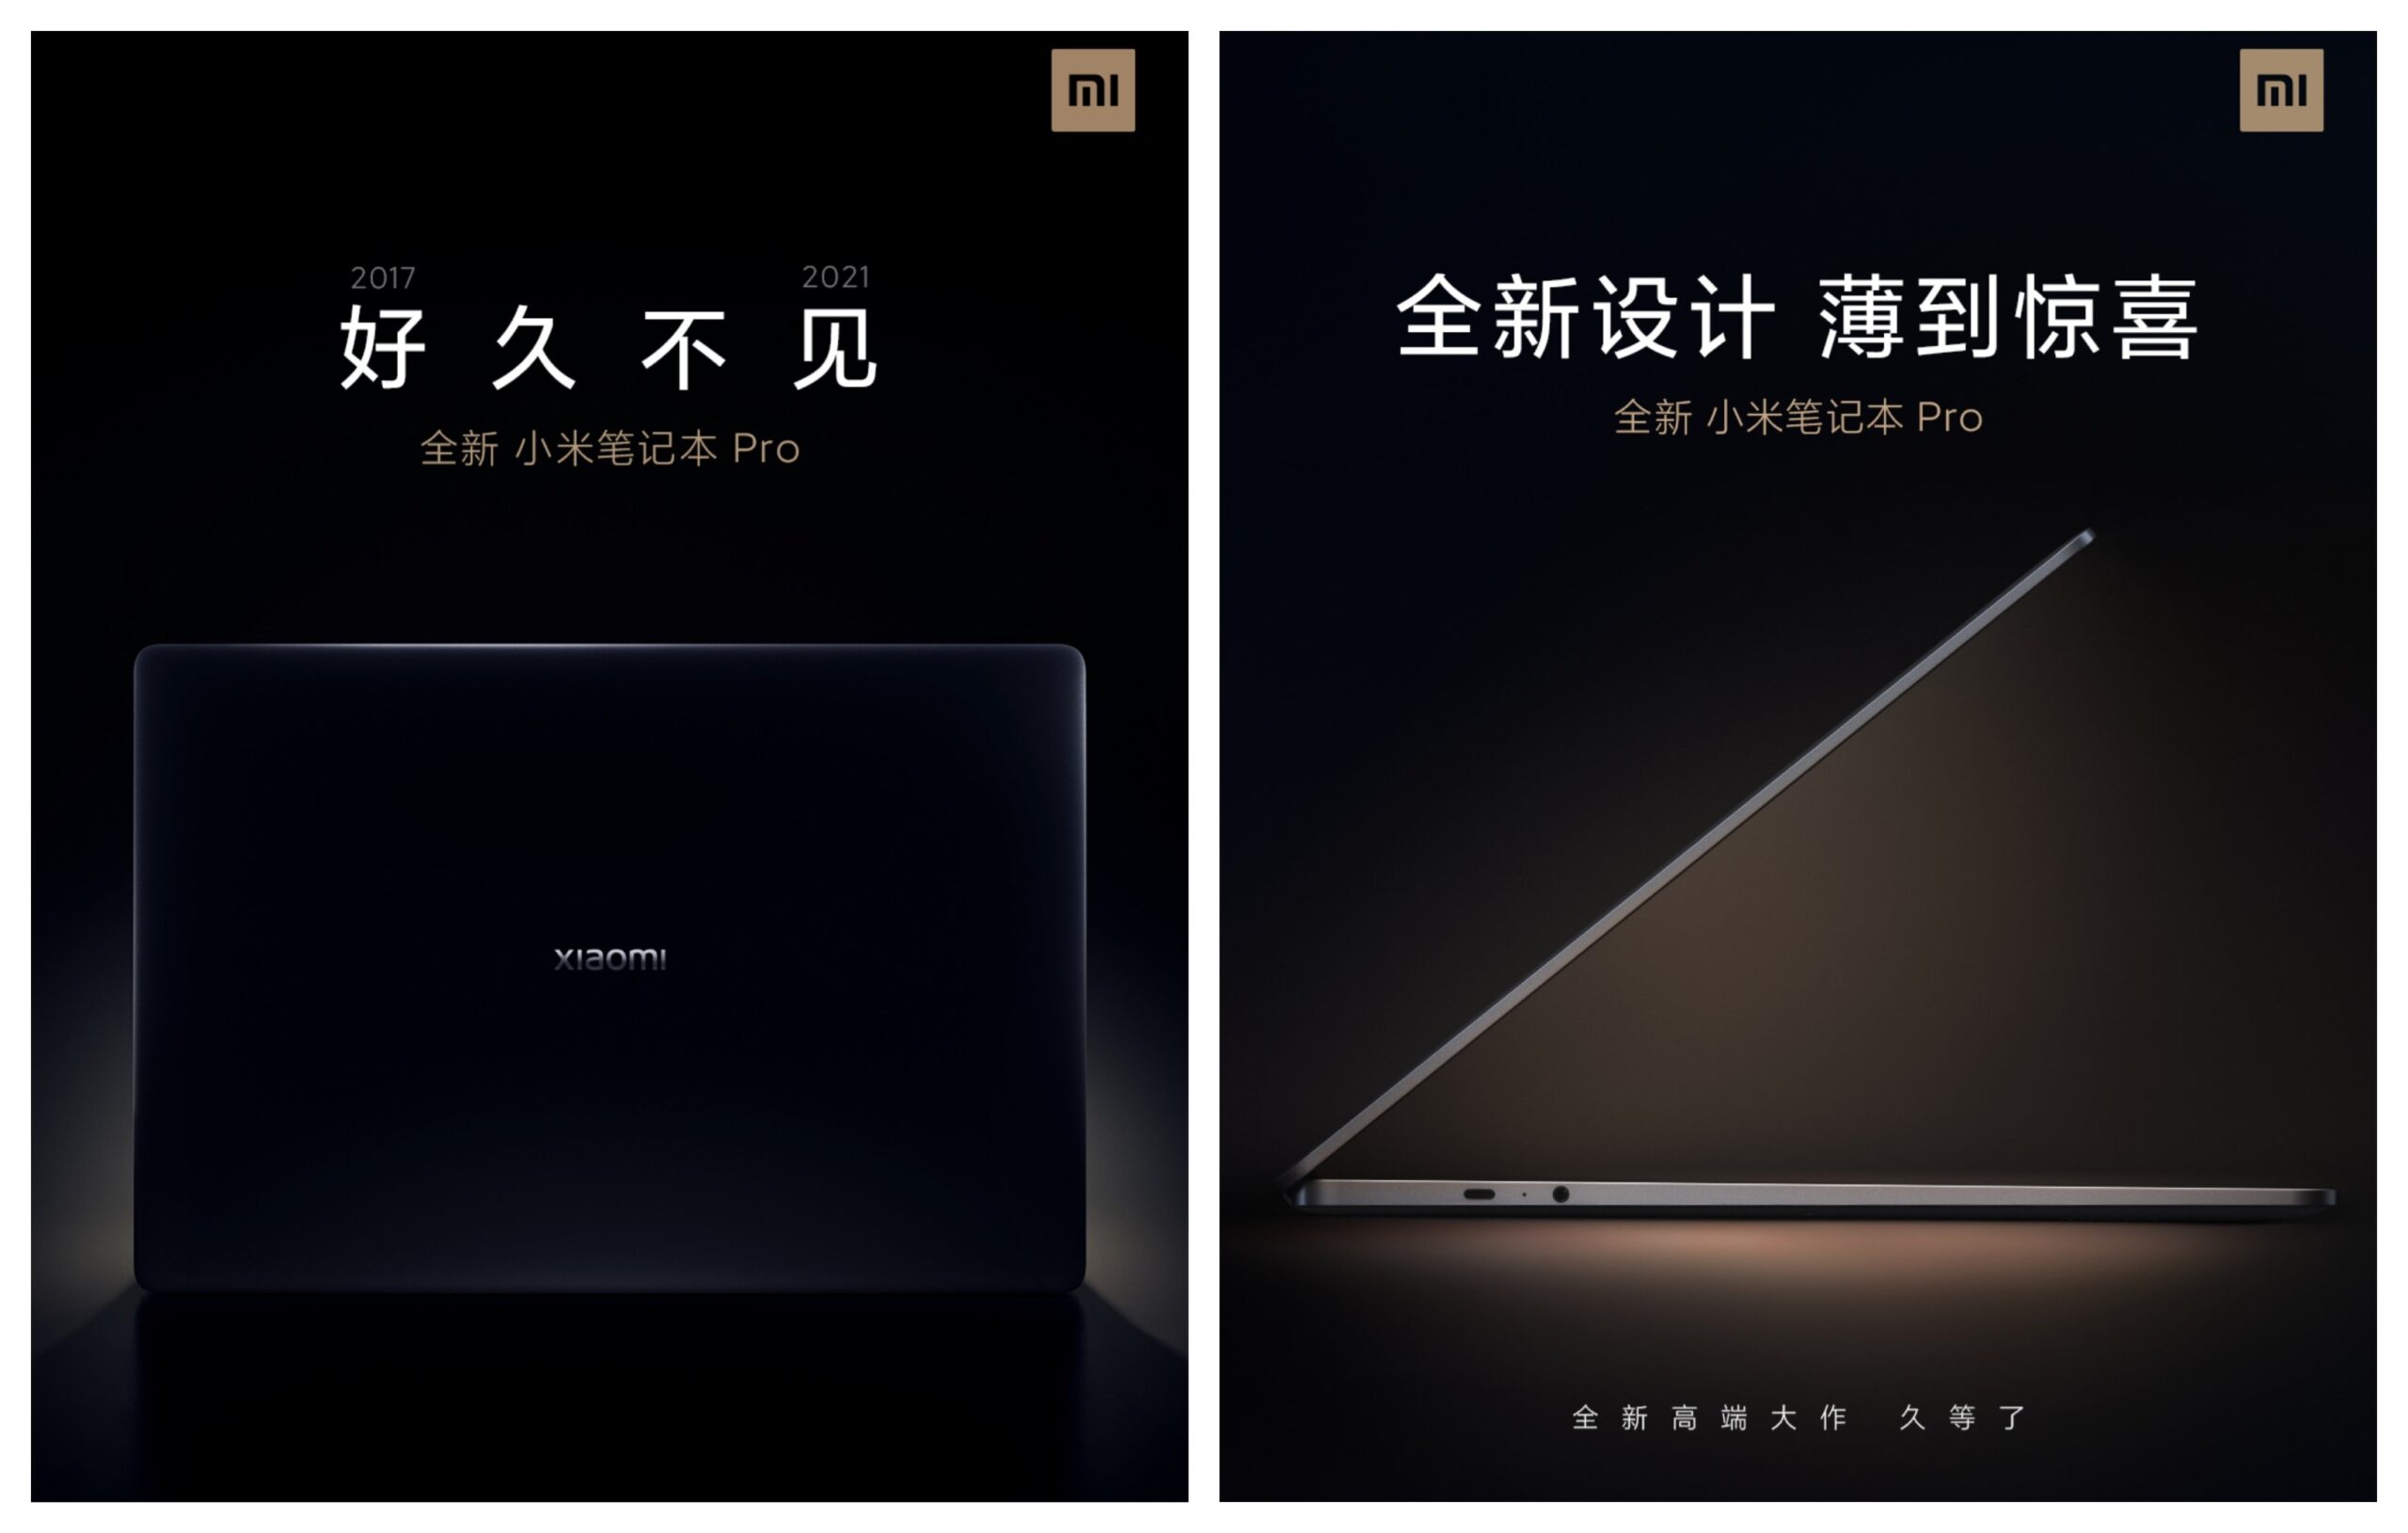 Xiaomi Mi Notebook Pro 2021 launch teased officially